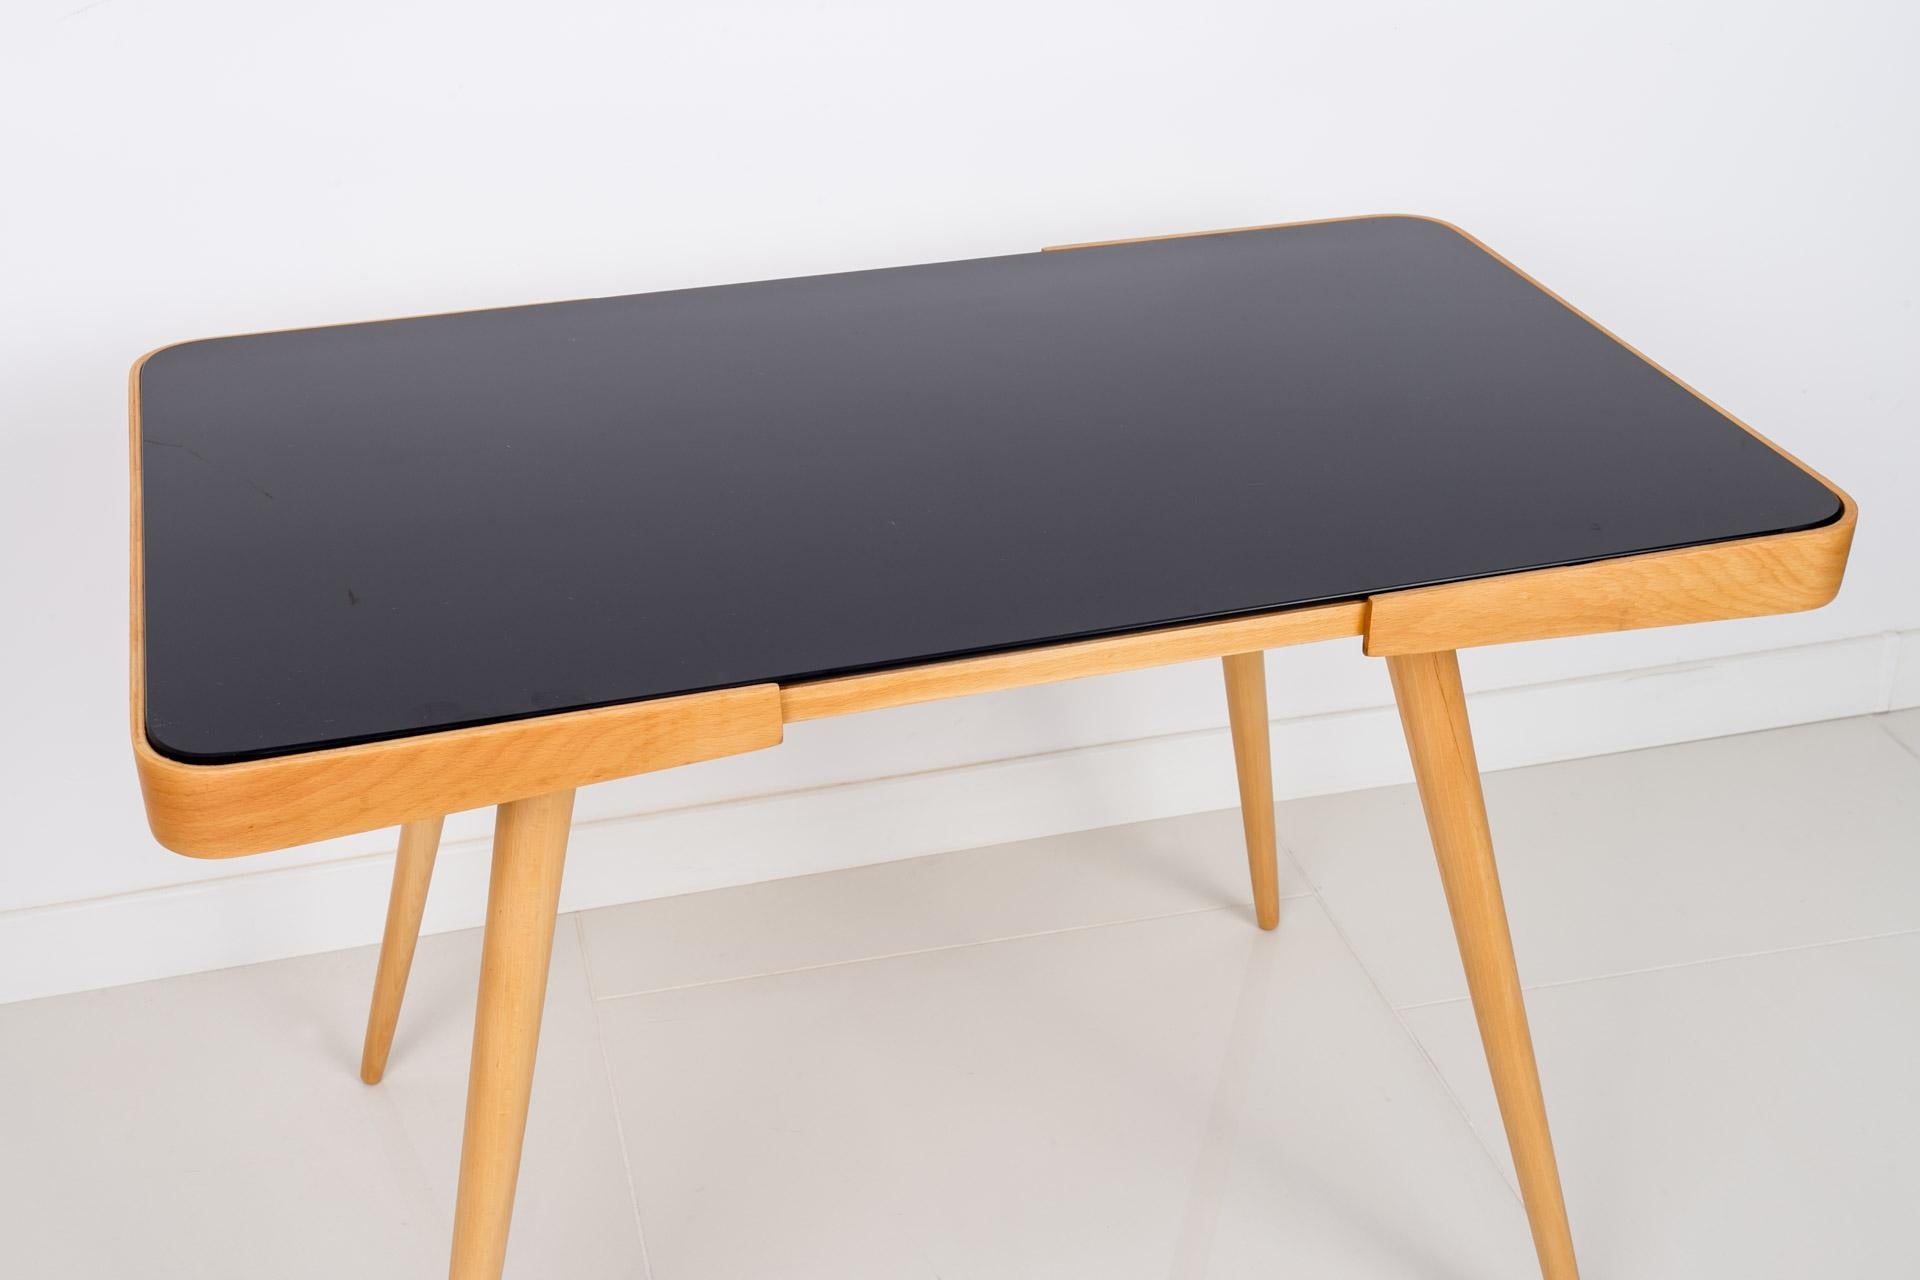 This beautiful coffee table was made in the 1960s, designed by famous Czech designer - Jiri Jiroutek. It was awarded at the Expo fair in 1958 in Brussels. It features 4 slender legs and top made of beech wood, covered with black glass. The piece is